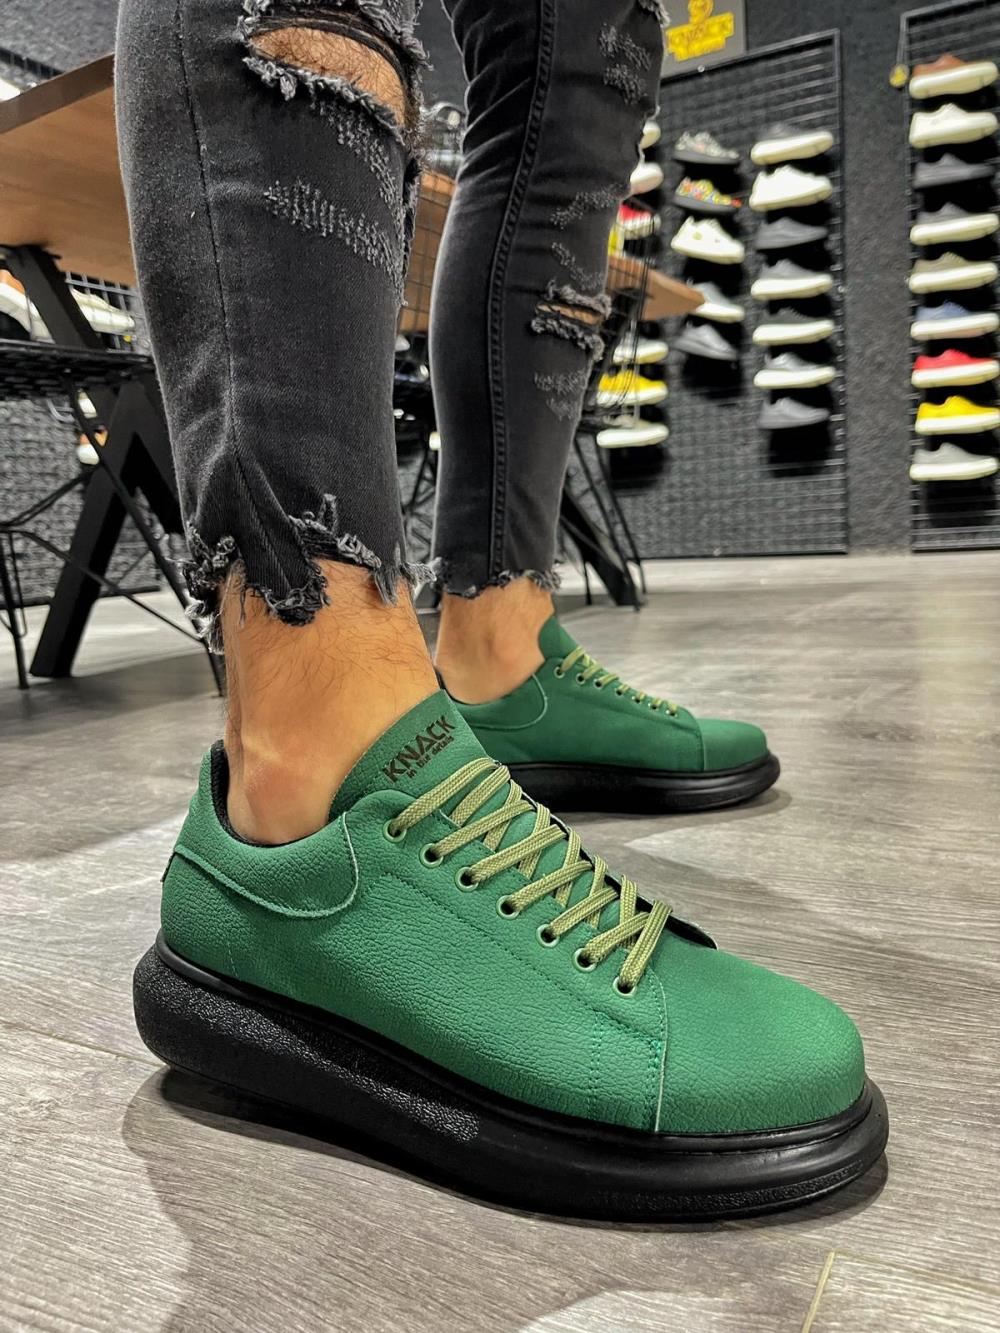 Knack High Sole Casual Shoes 045 Green (Black Sole) - STREETMODE ™